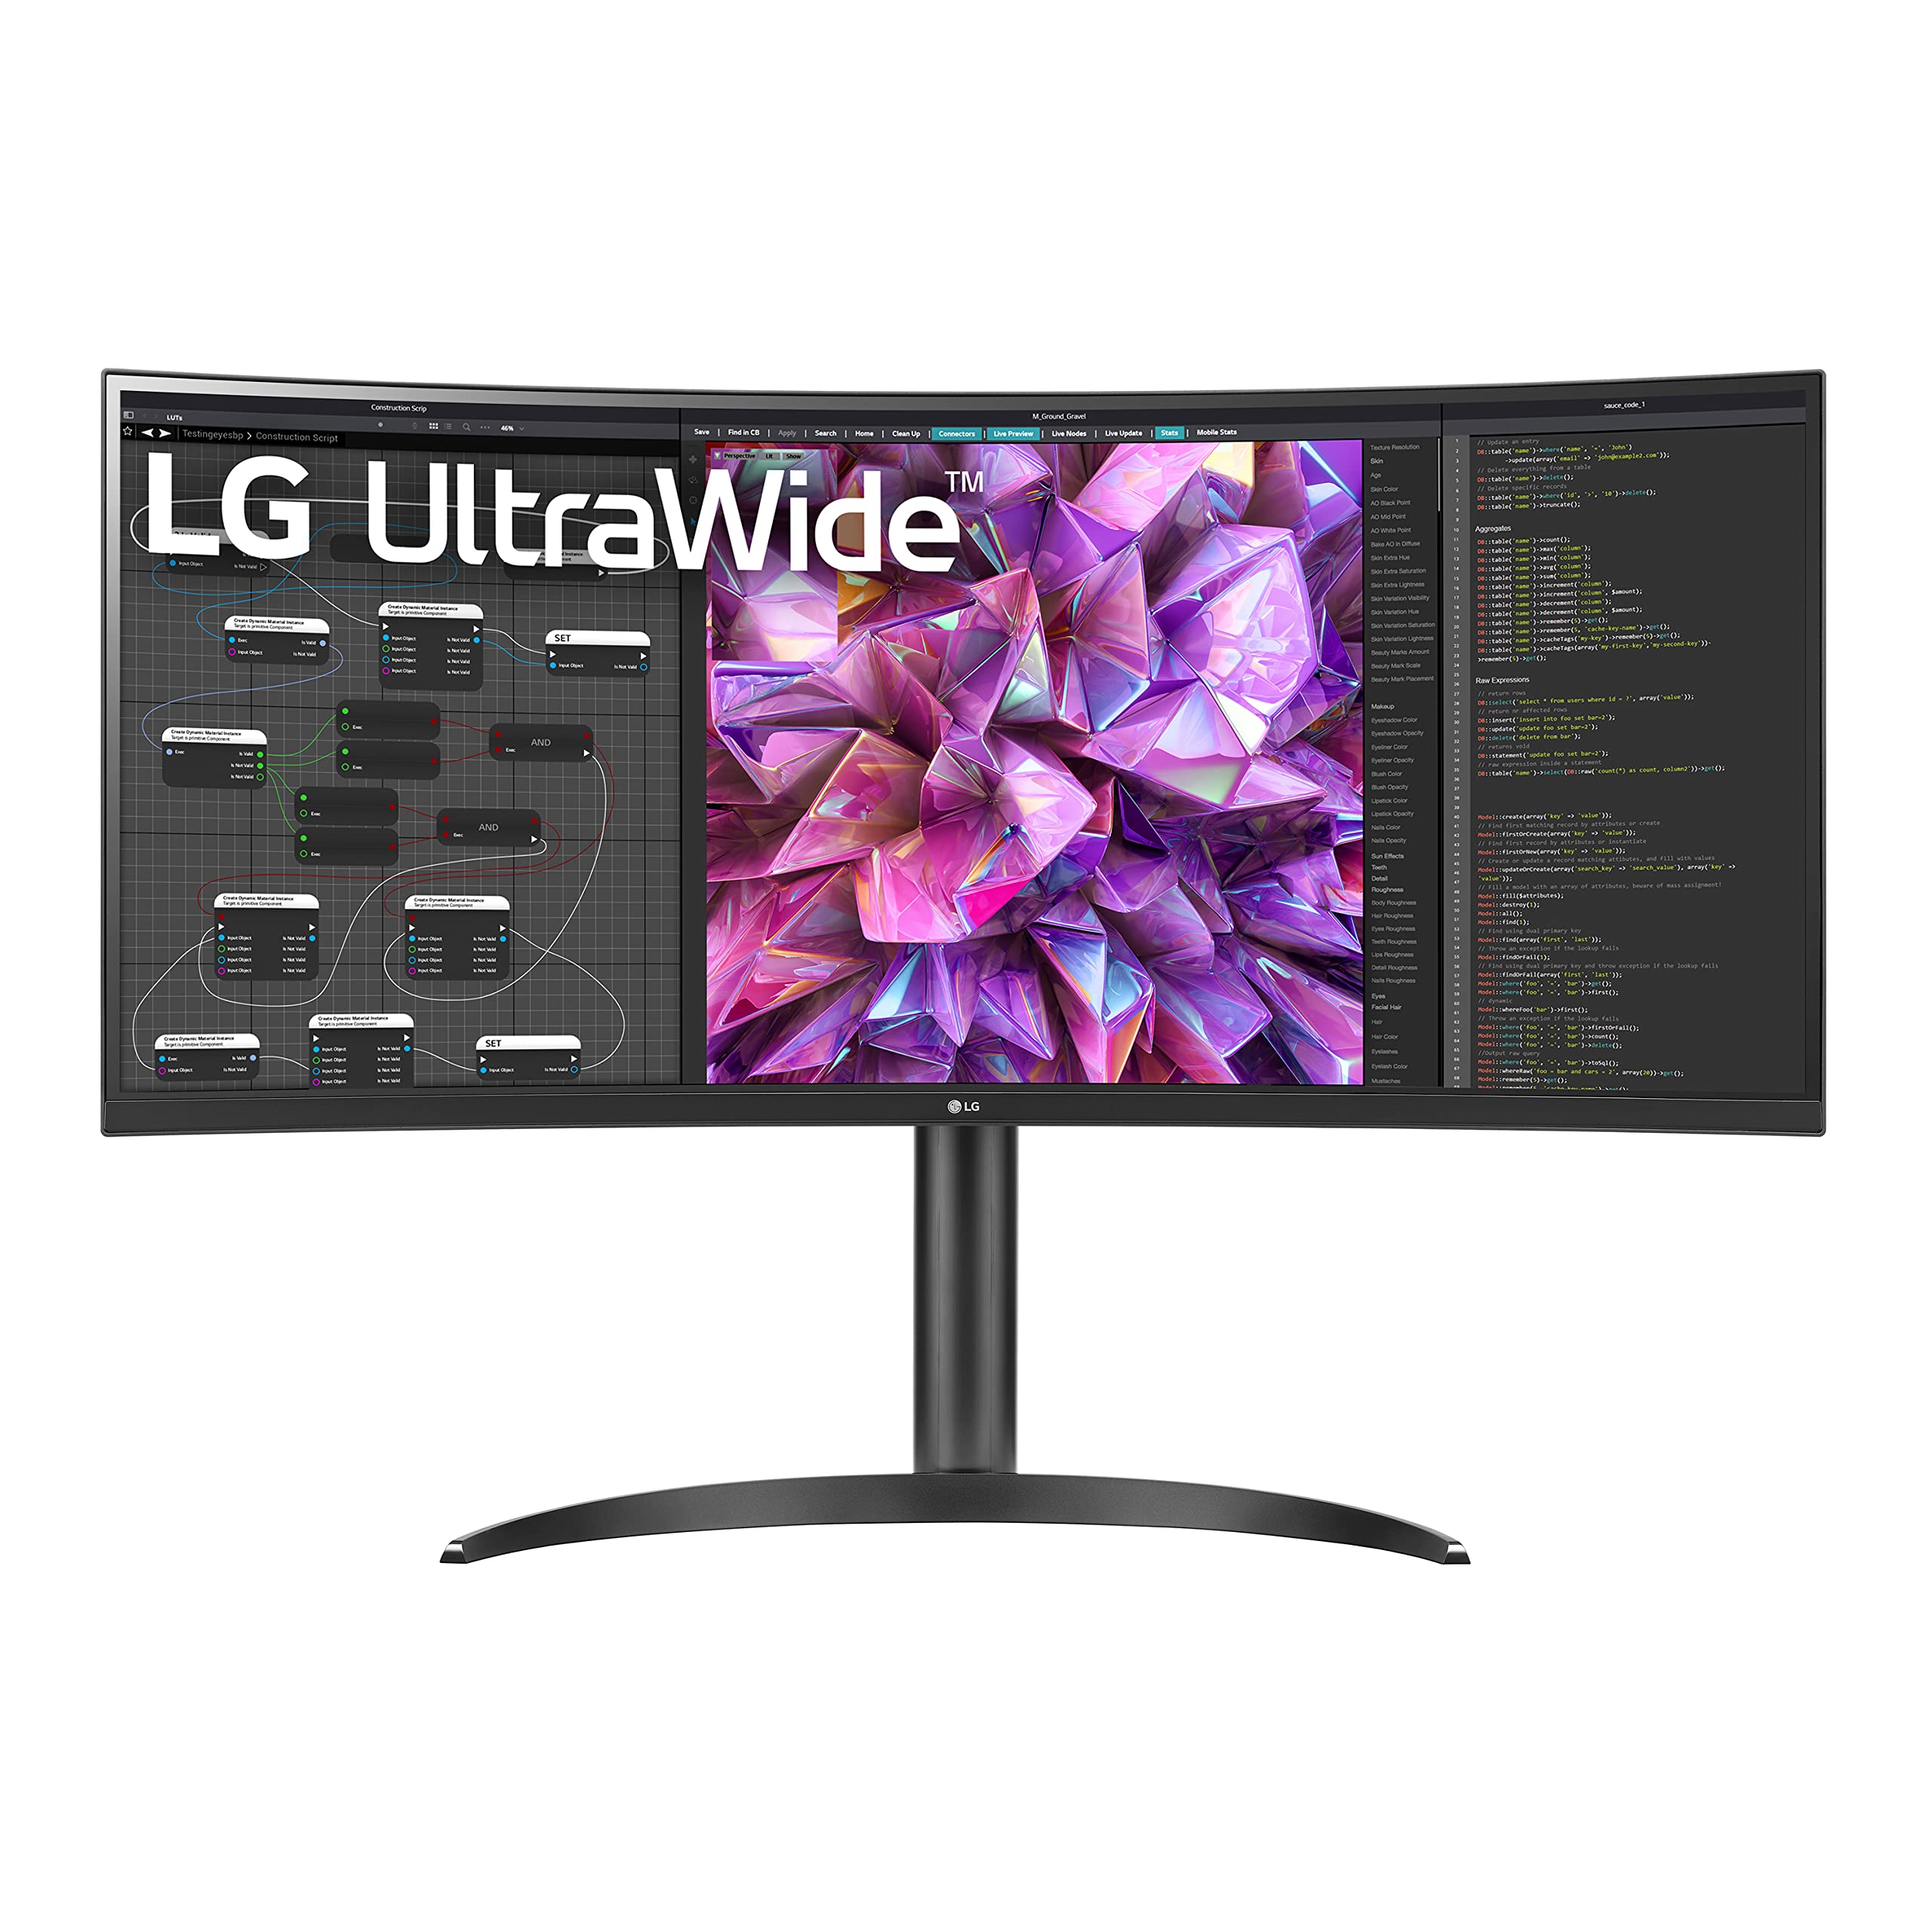 LG UltraWide QHD 34-Inch Curved Computer Monitor 34WQ73A-B, IPS, USB-C, 90W for $340 at Amazon